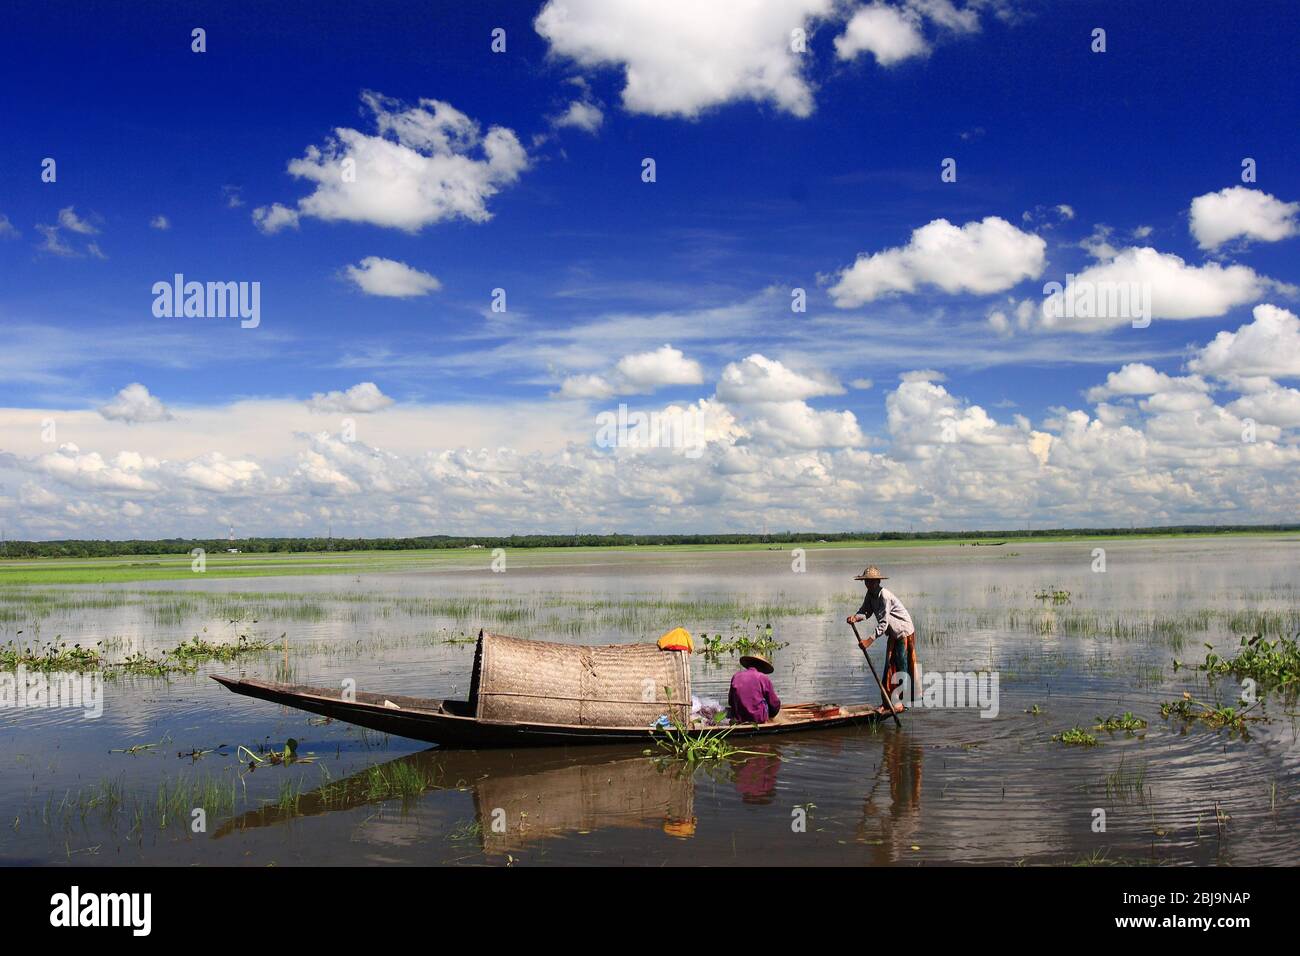 Fishermen Fishing on the Tanguar Haor also called Tangua Haor using Boats. It is a Unique Wetland Ecosystem. 17th August, Sunamganj, Bangladesh 2017. Stock Photo